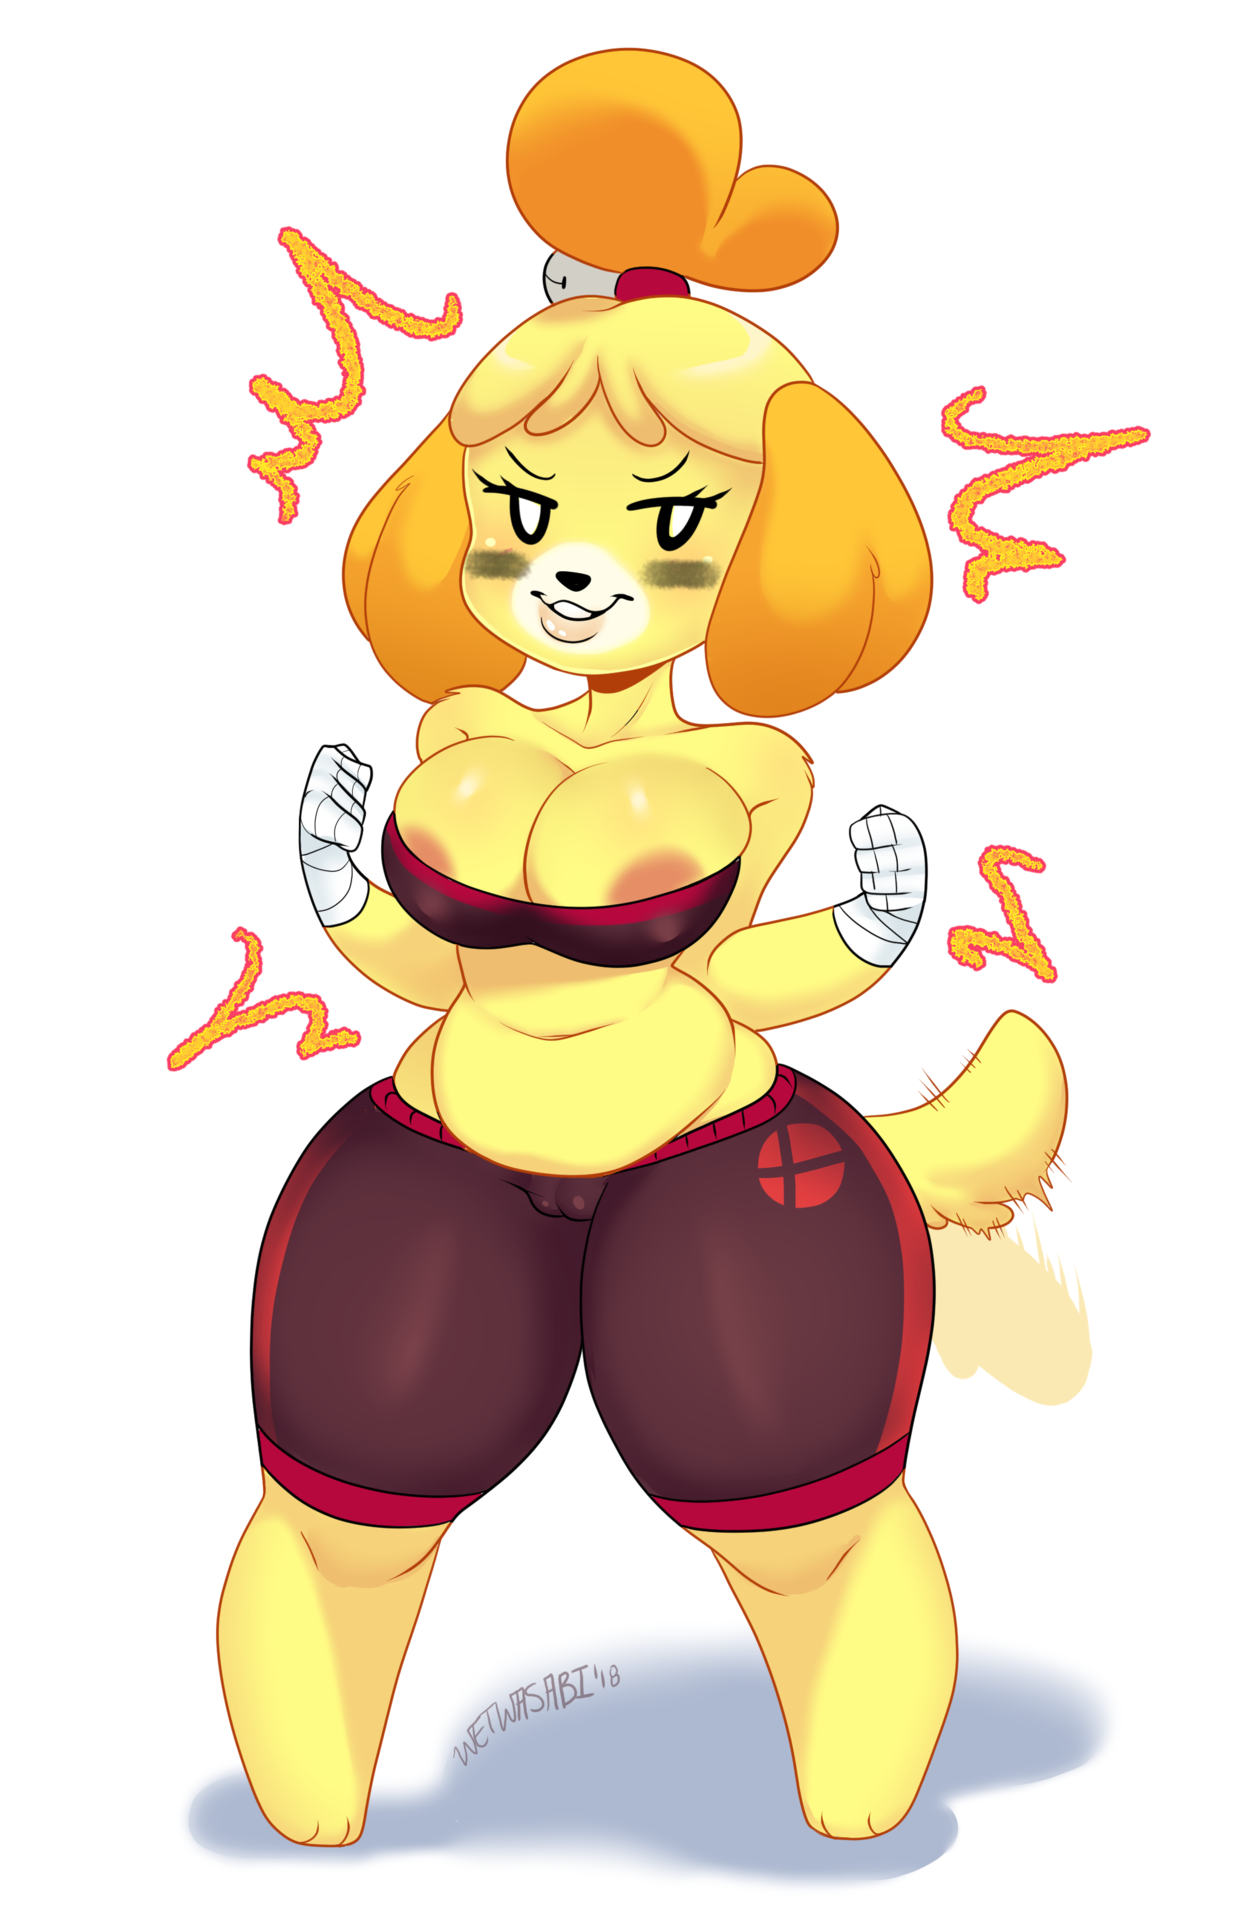 Animalcrossing Isabelle Porn Furry - Lewd Goopling â€” Ready for Smash and ready to get smashed!